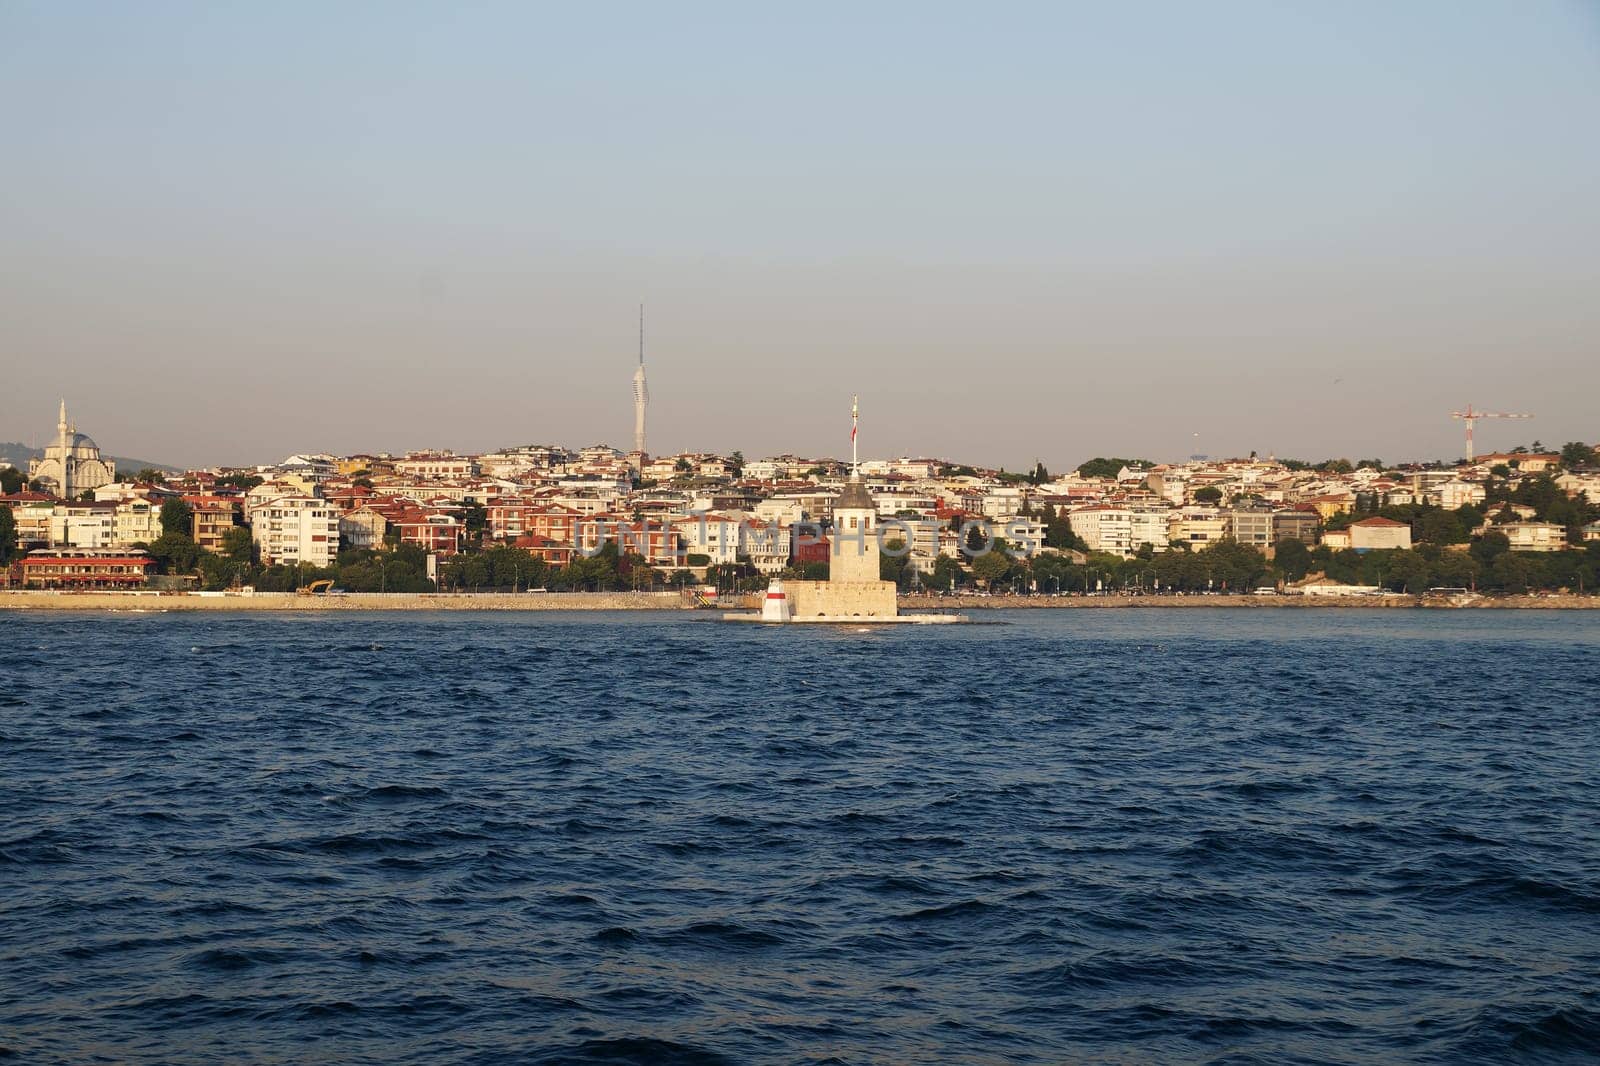 view of the Istanbul coast from the sea on a sunny day.